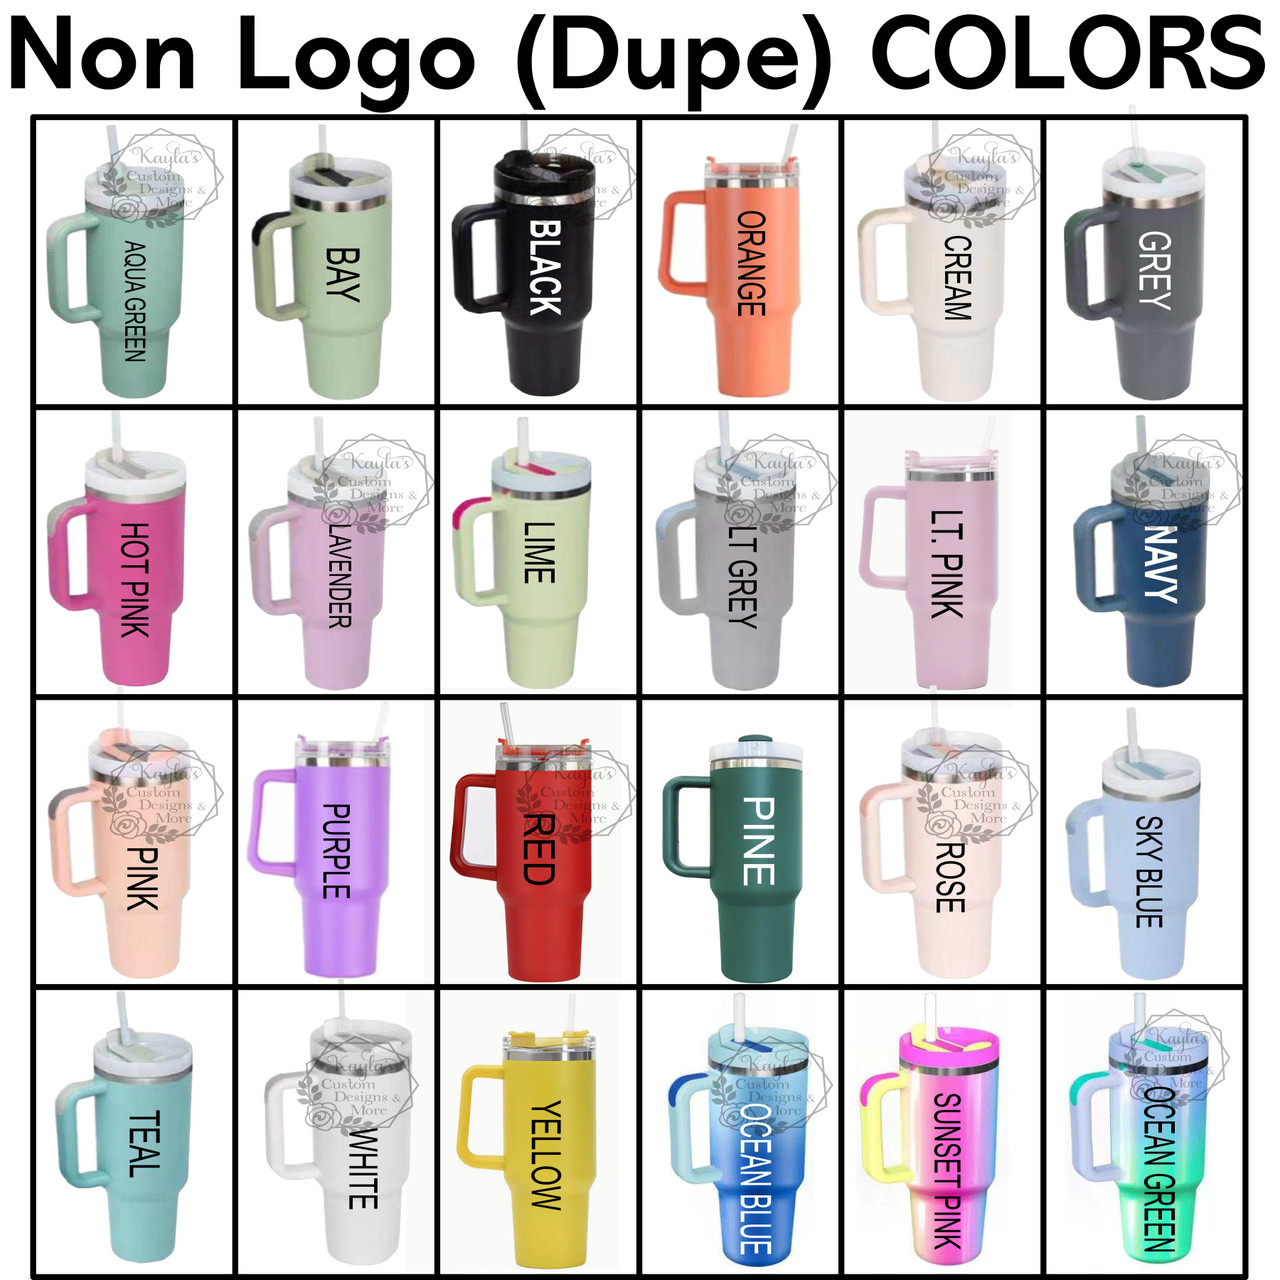 https://cdn11.bigcommerce.com/s-6delidahxt/images/stencil/1280x1280/products/2400/3960/Dupe_Cup_Colors_Mockup-1__61977.1700186065.jpg?c=1